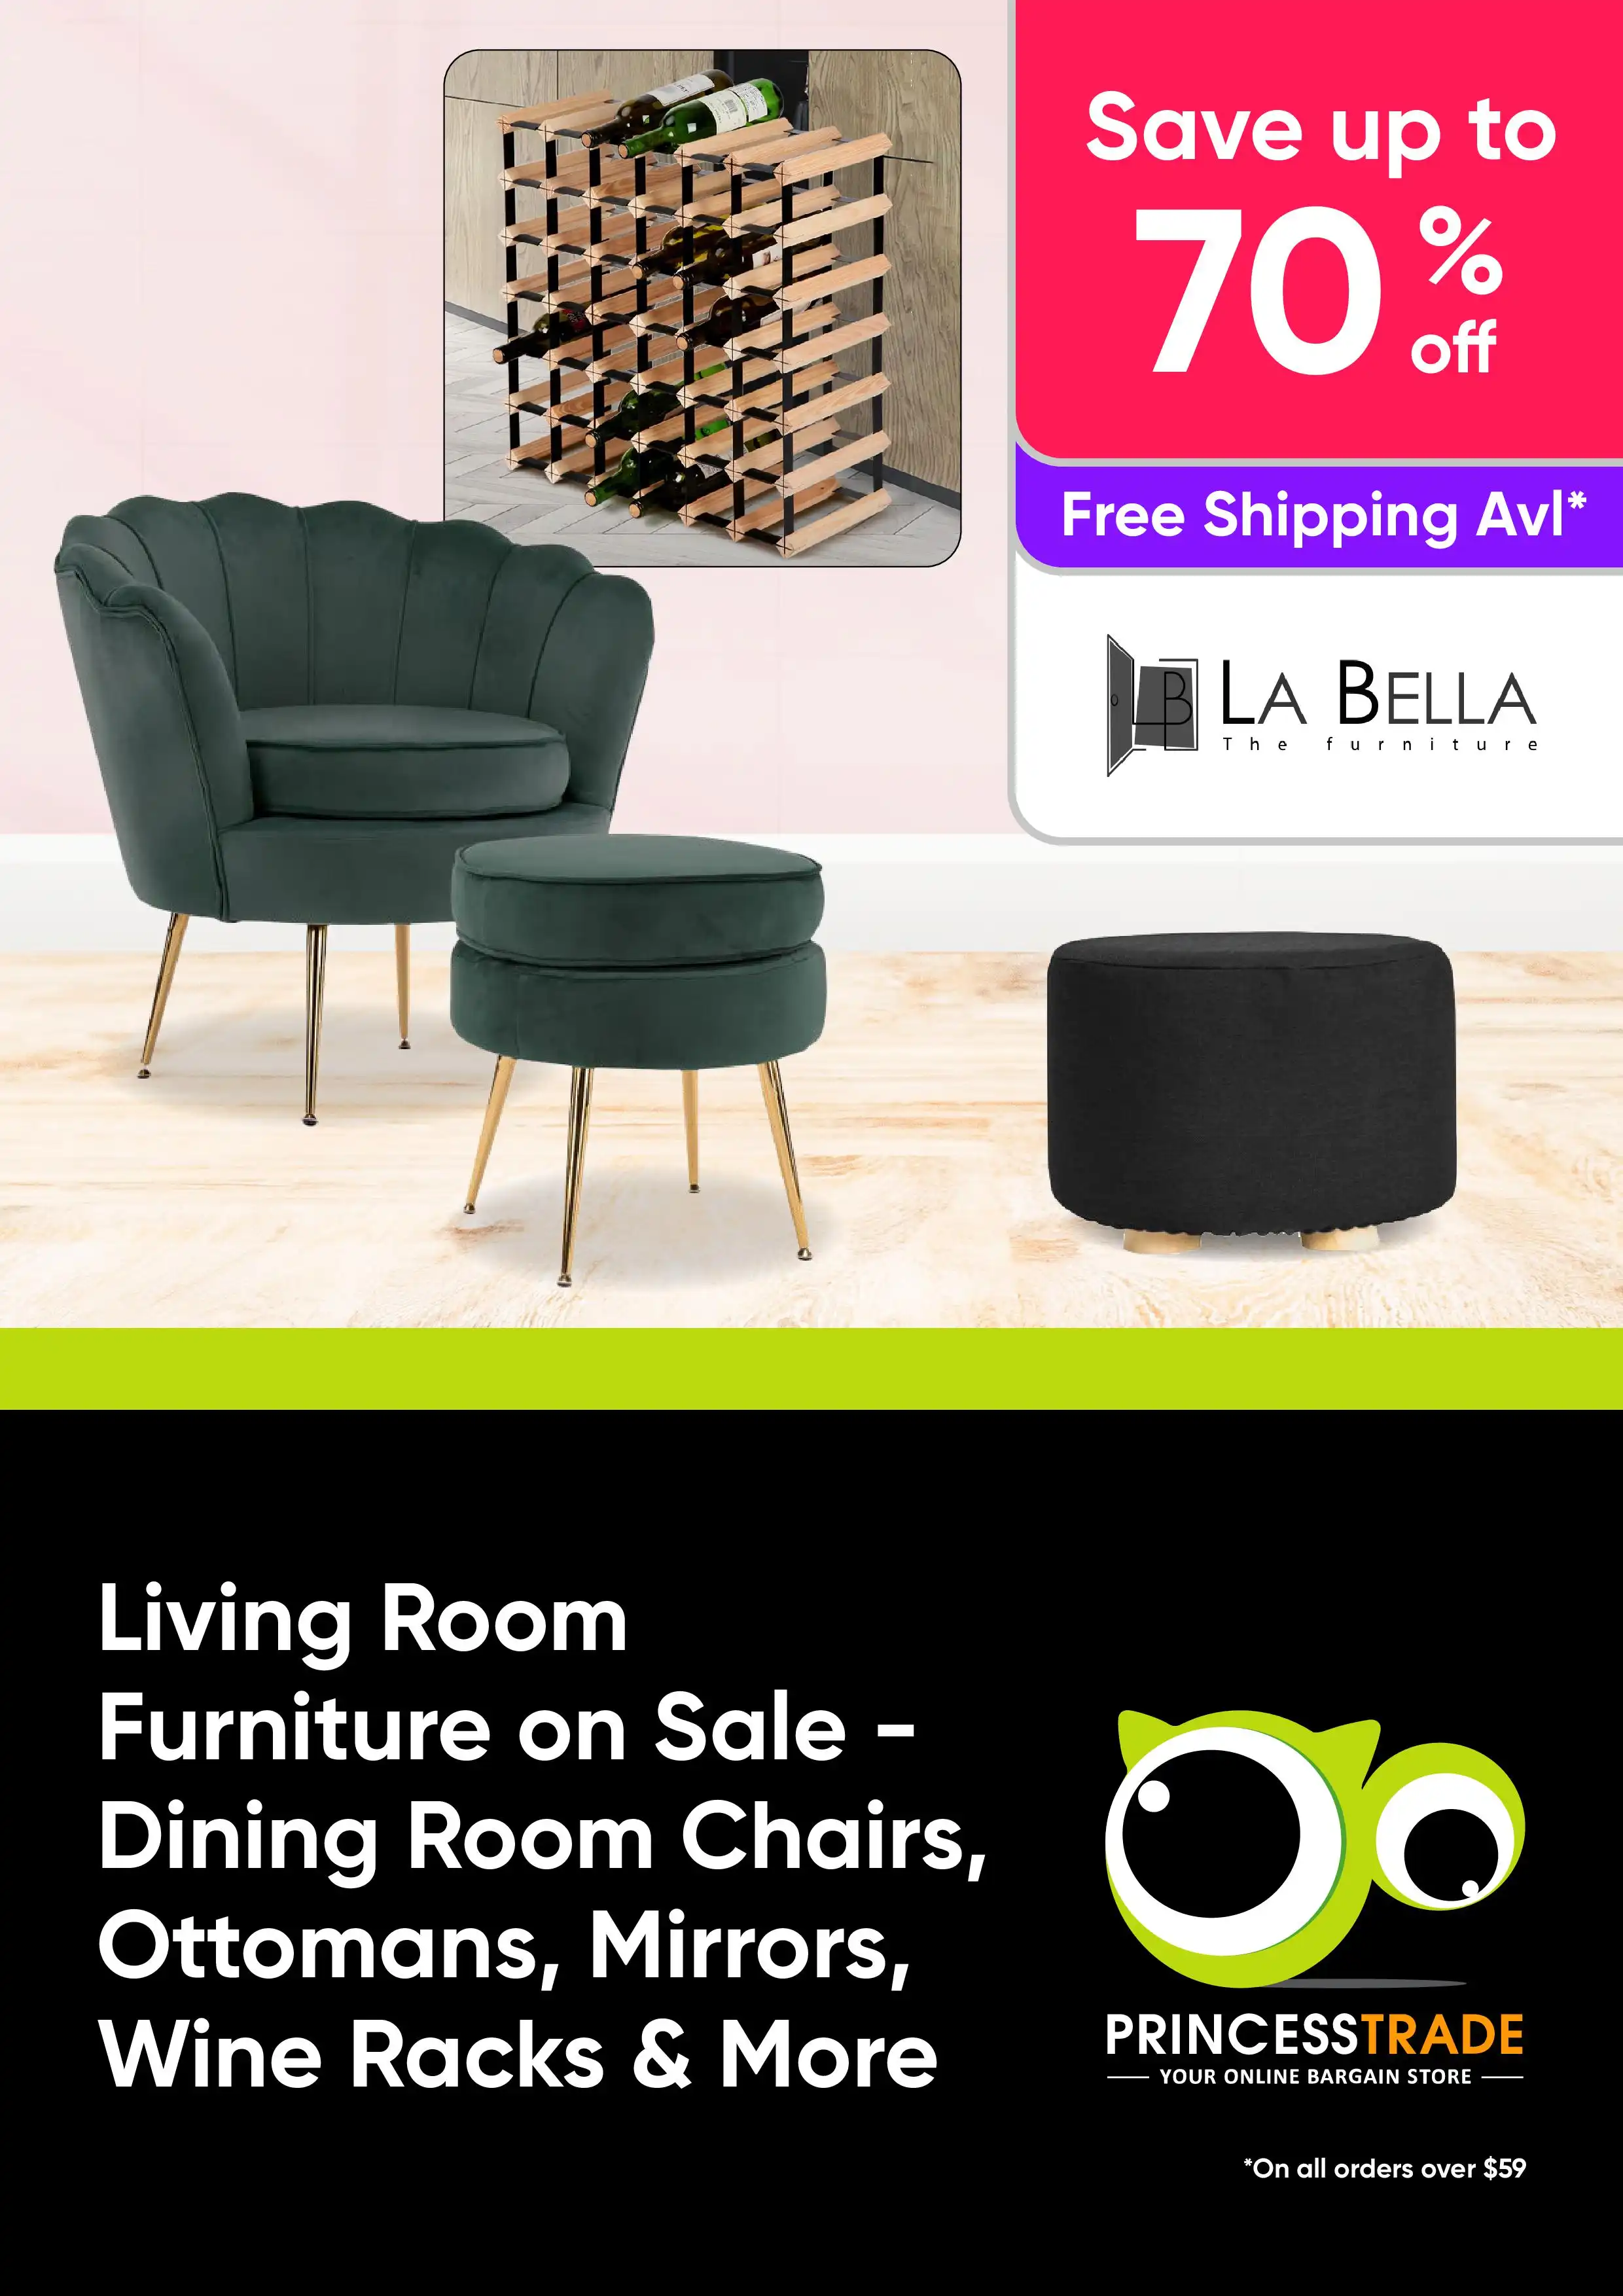 Living Room Furniture on Sale - Dining Room Chairs, Ottomans, Mirrors, Wine Racks & More